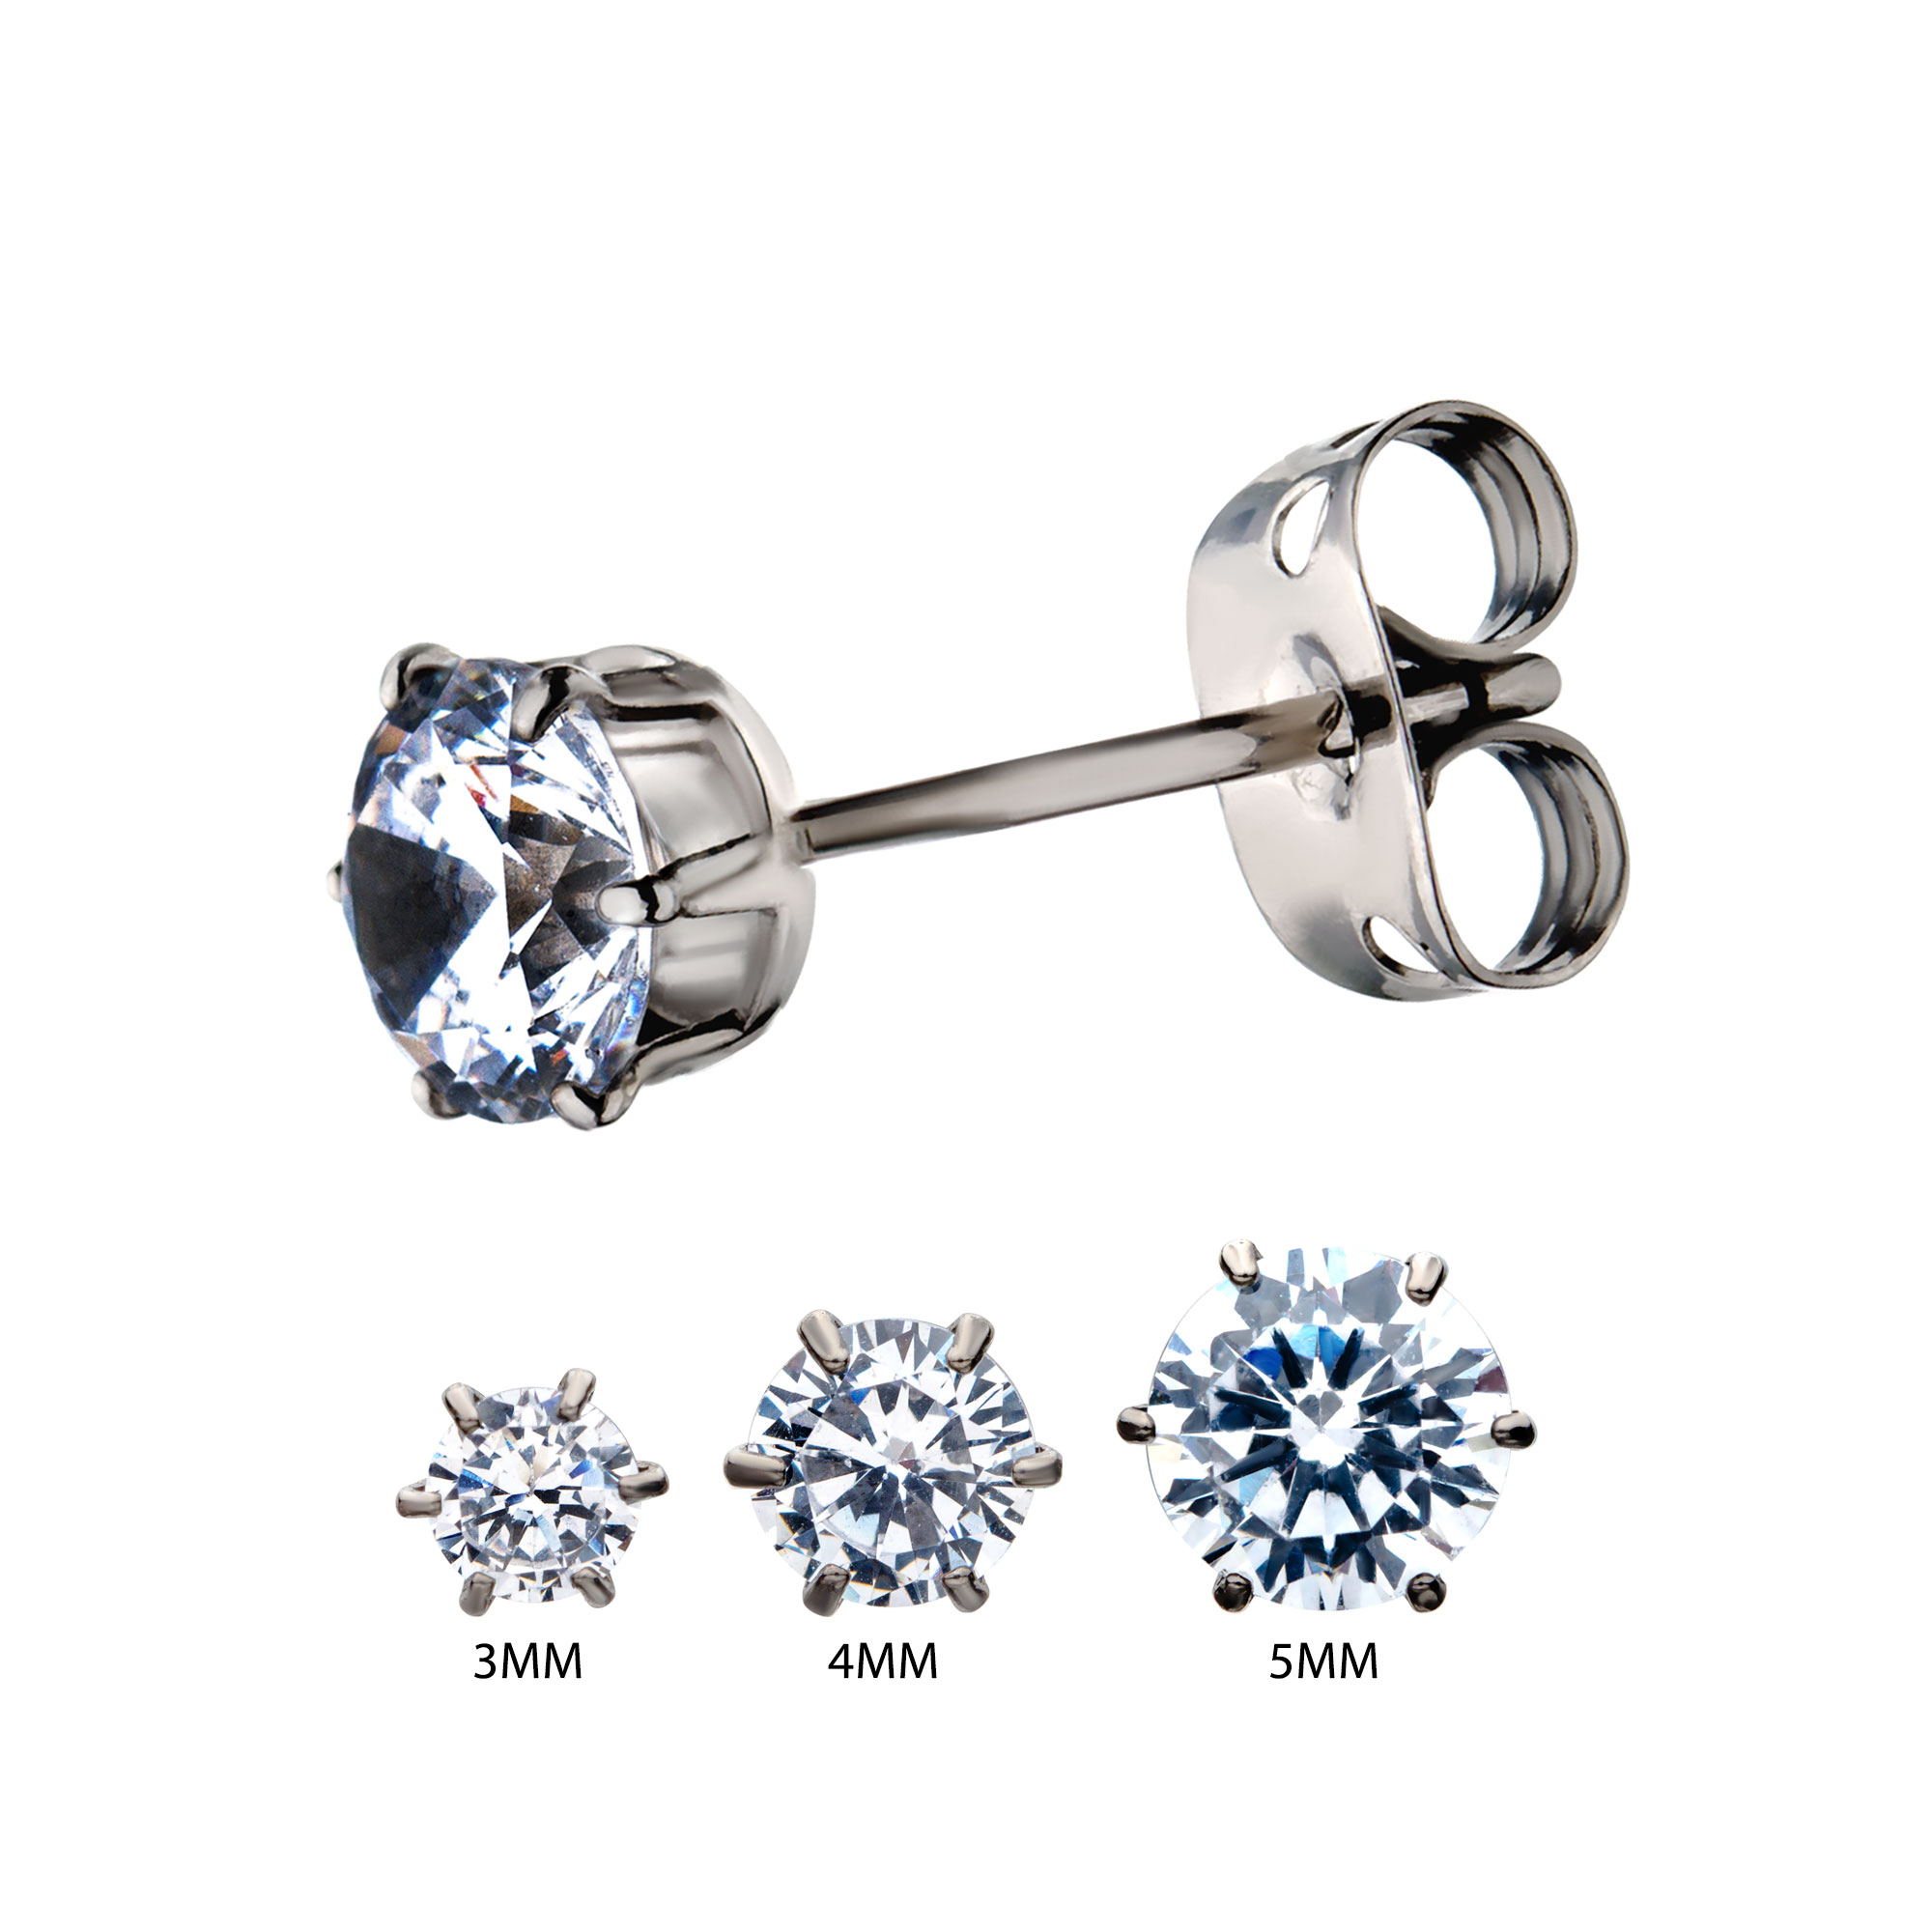 20g Titanium Post and Butterfly Back with Prong Set CZ Stud Earrings Midtown Diamonds Reno, NV